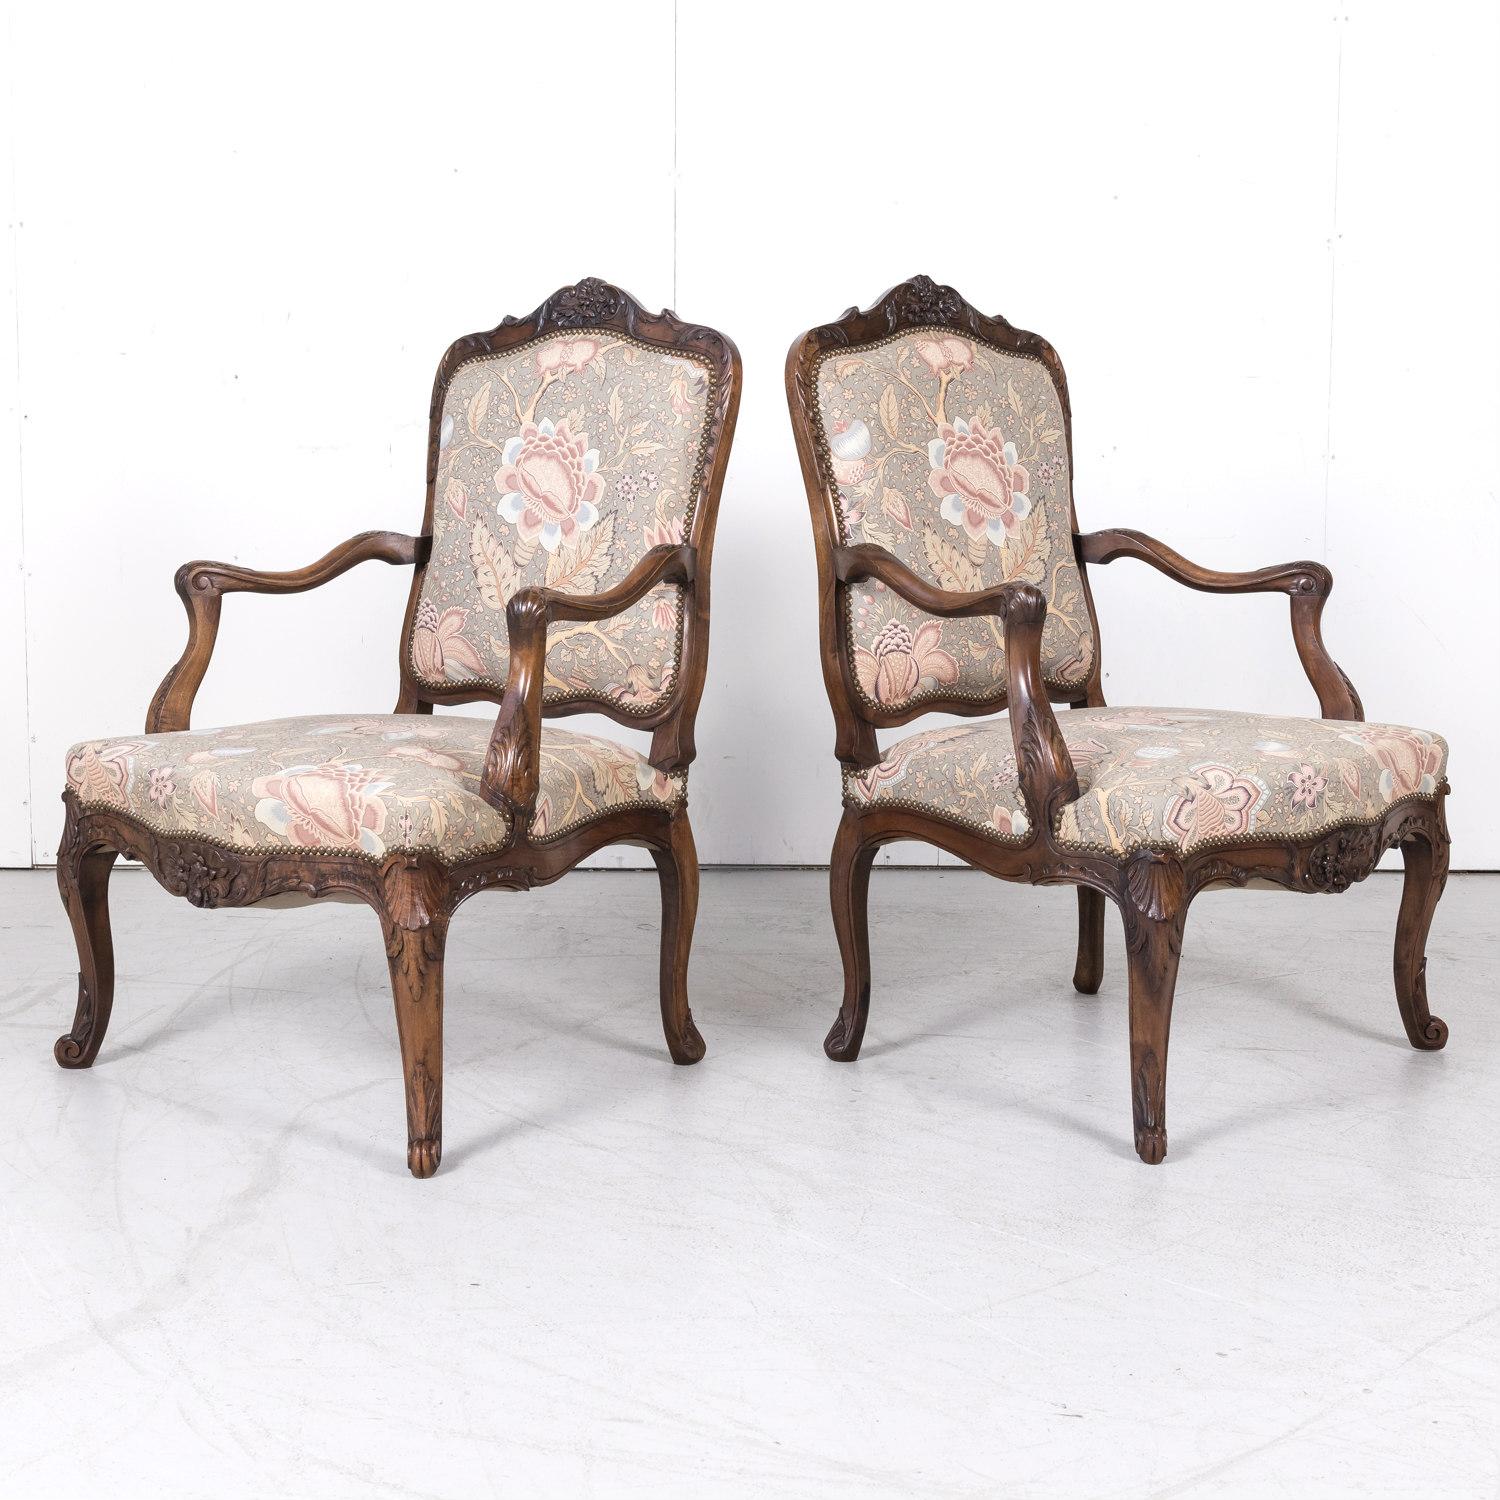 A fine pair of carved 18th century Louis XV period fauteuils handcrafted in Lyon of solid walnut, circa mid-1700s. Featuring a shaped back with a crest of finely carved floral and foliate motifs and elegant scrolling arms with carved acanthus plumes